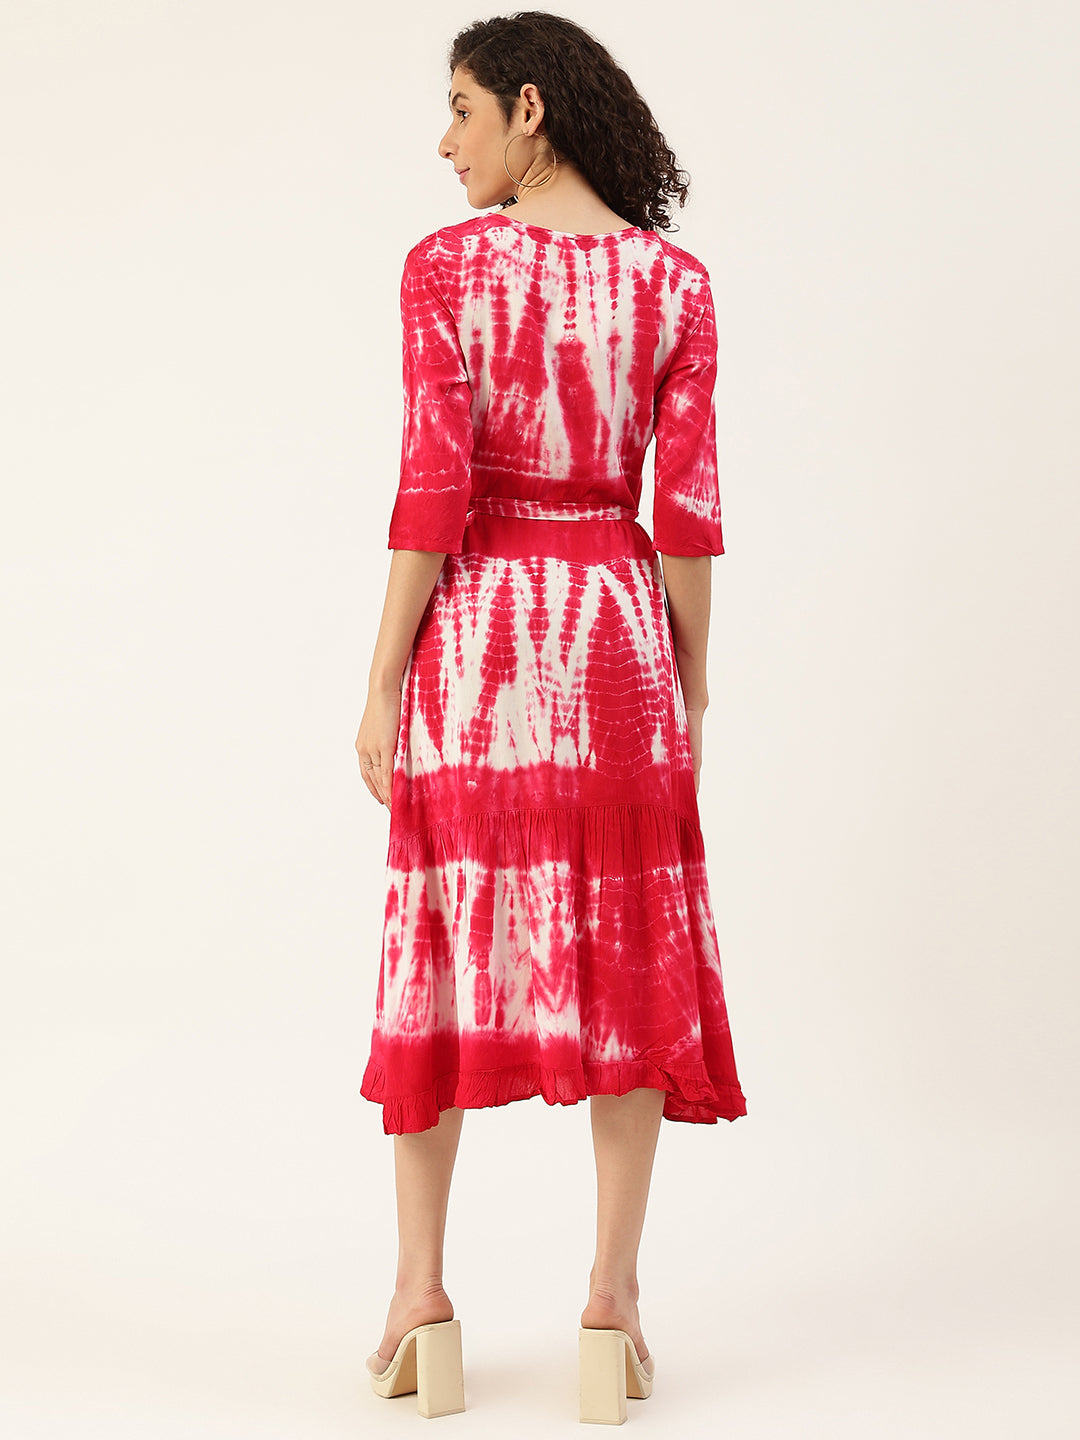 Pink & White Abstract Tie Dye A-Line Midi Dress With Tie-Up Closure